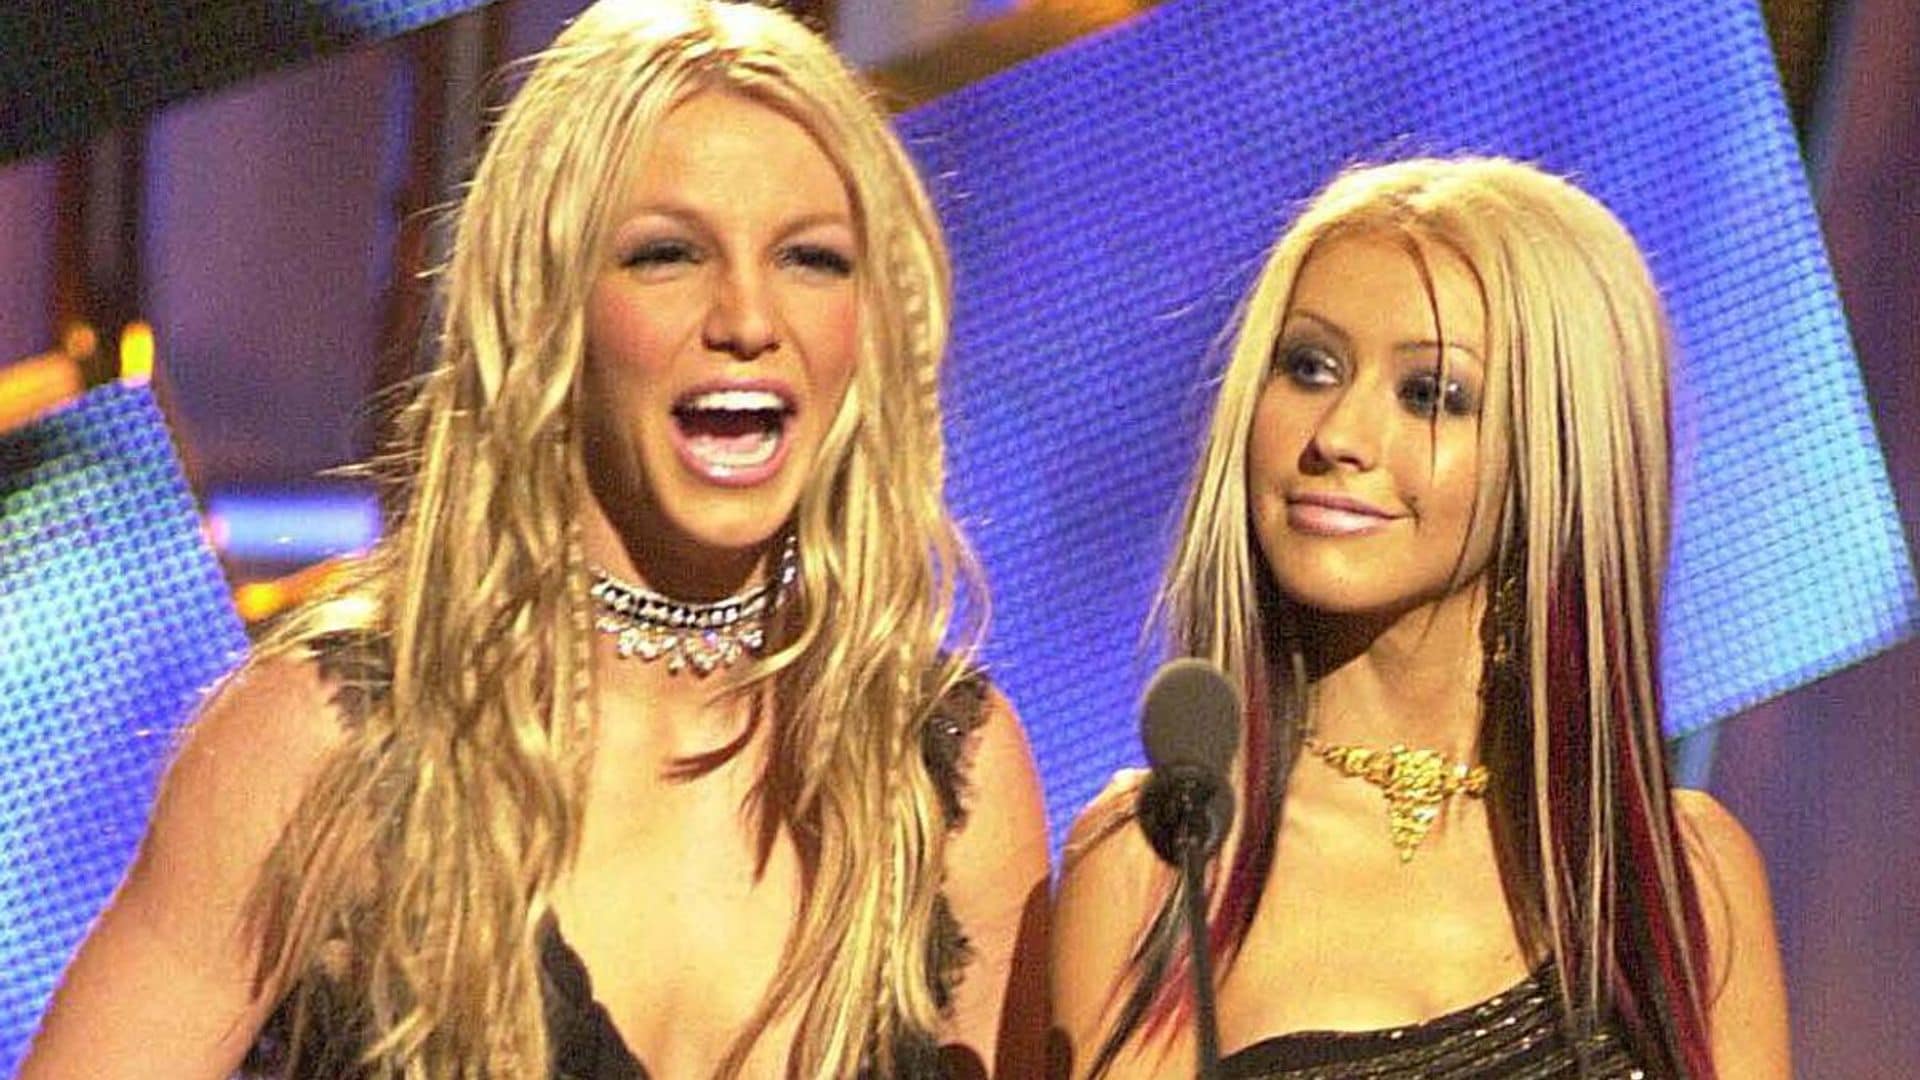 Christina Aguilera would rather not be in Britney Spears’ memoir